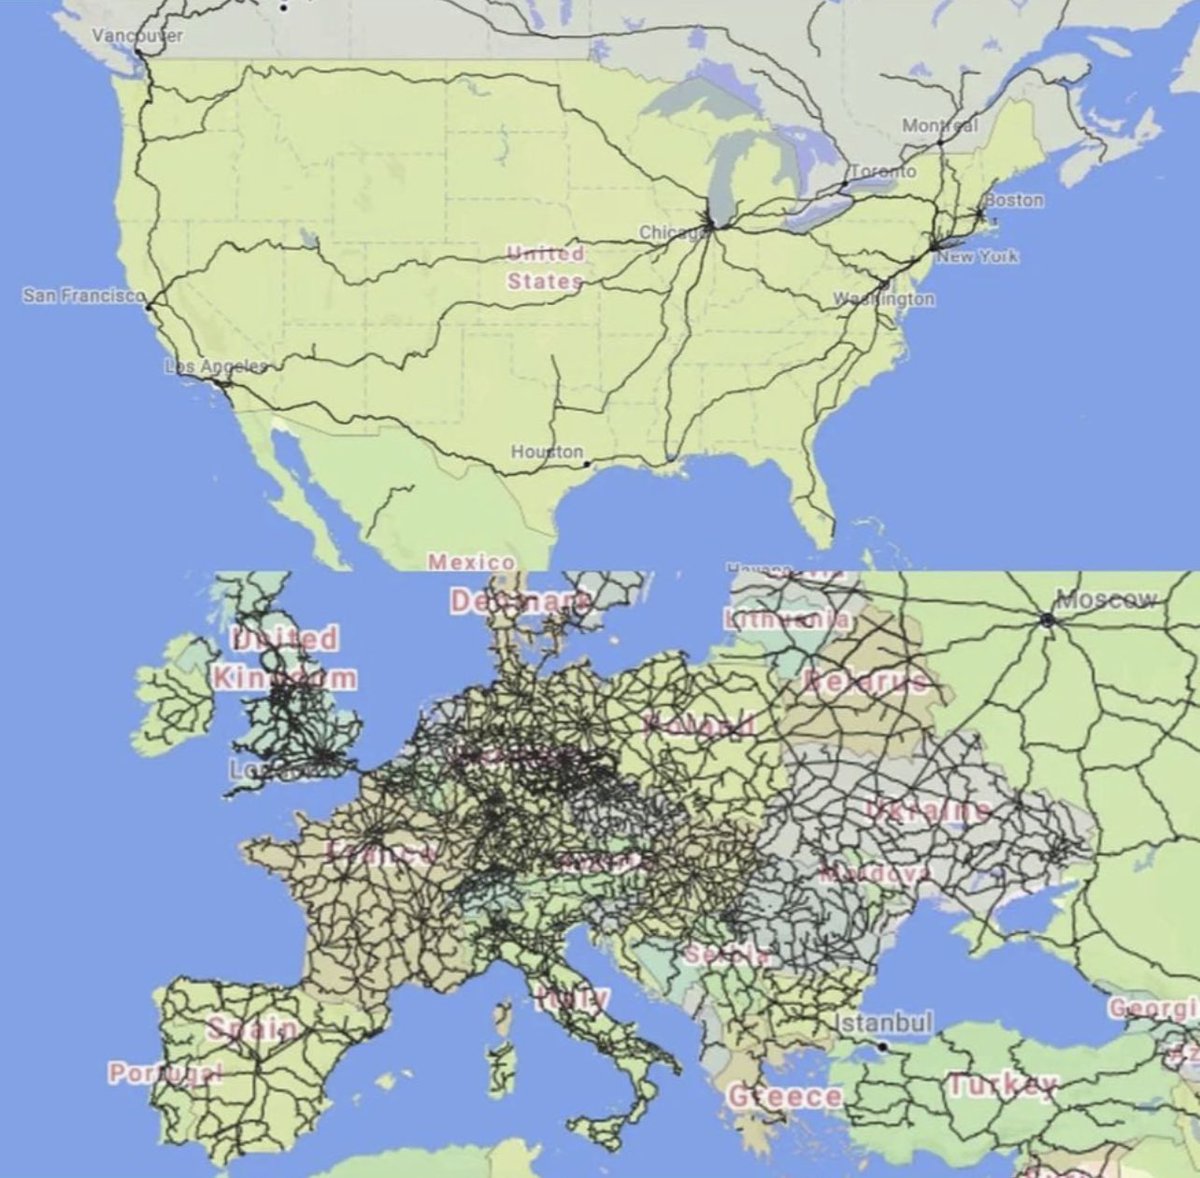 Rail networks in the United States vs Europe